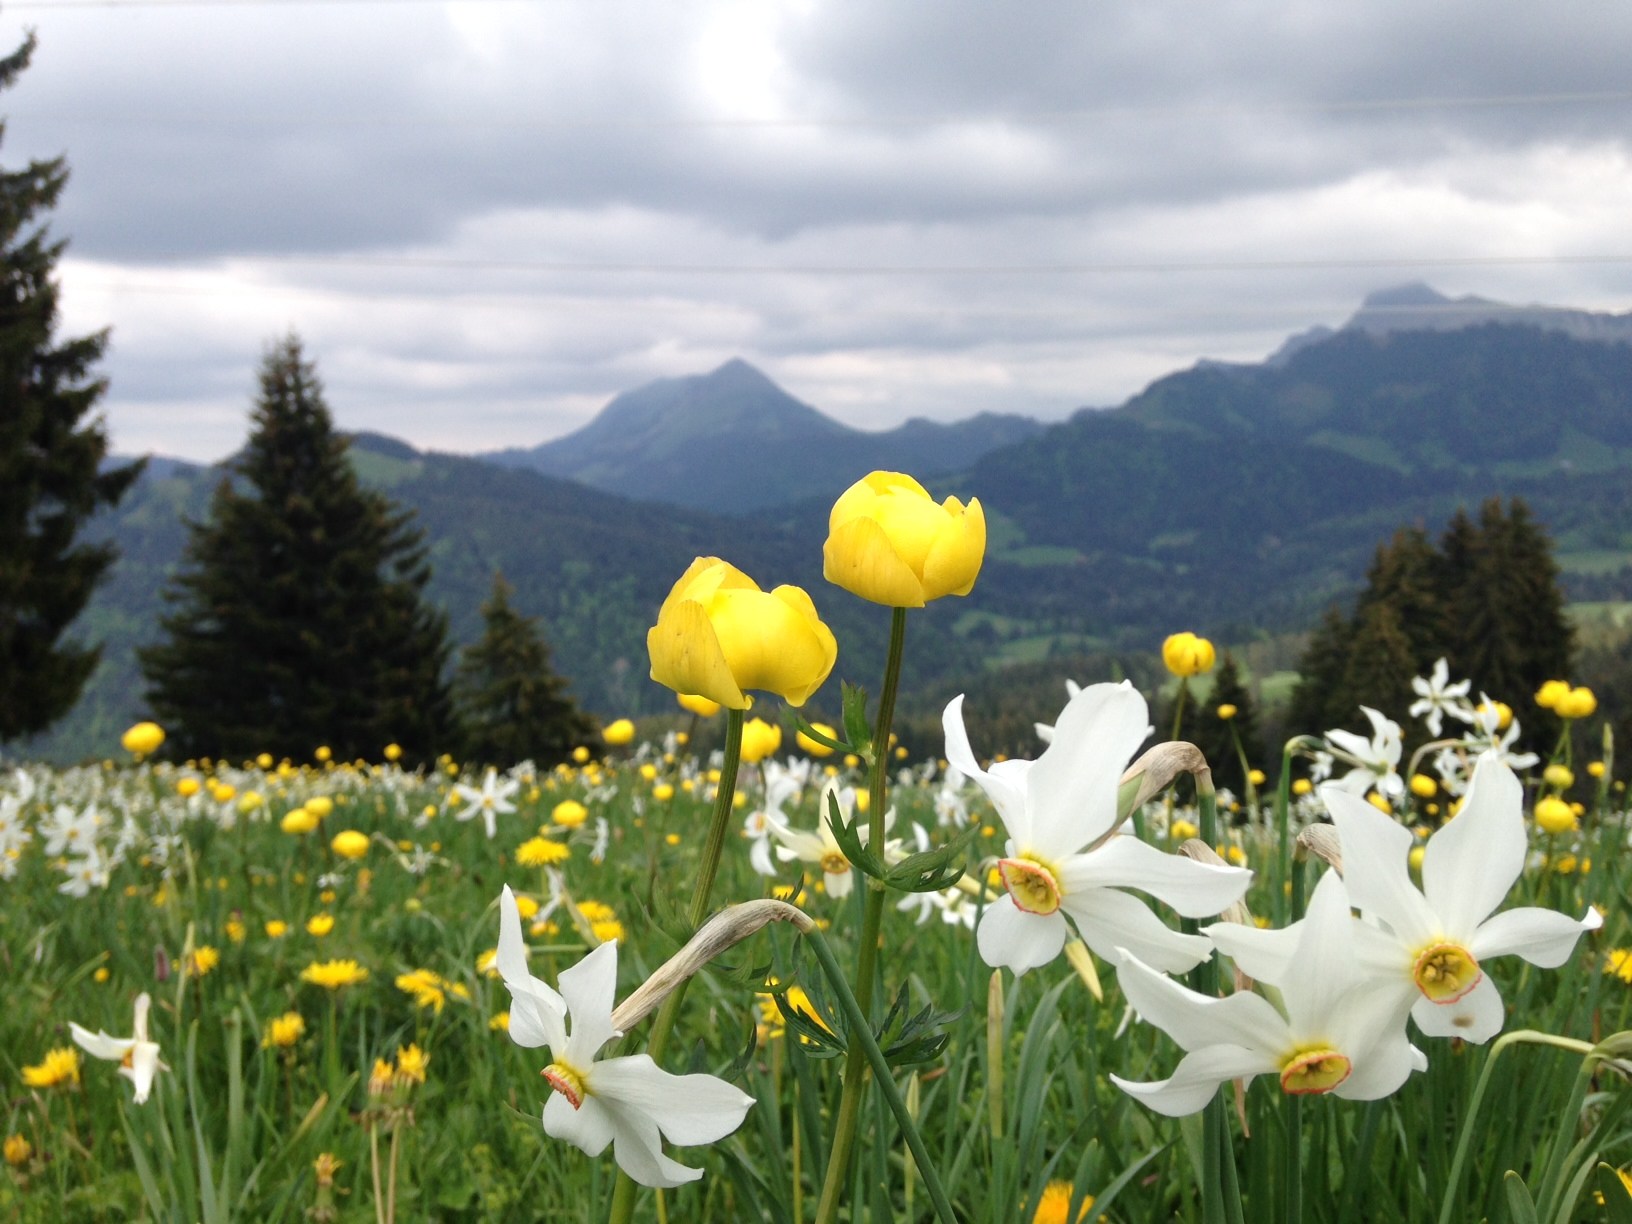 Blooming Swiss narcissus season approaches